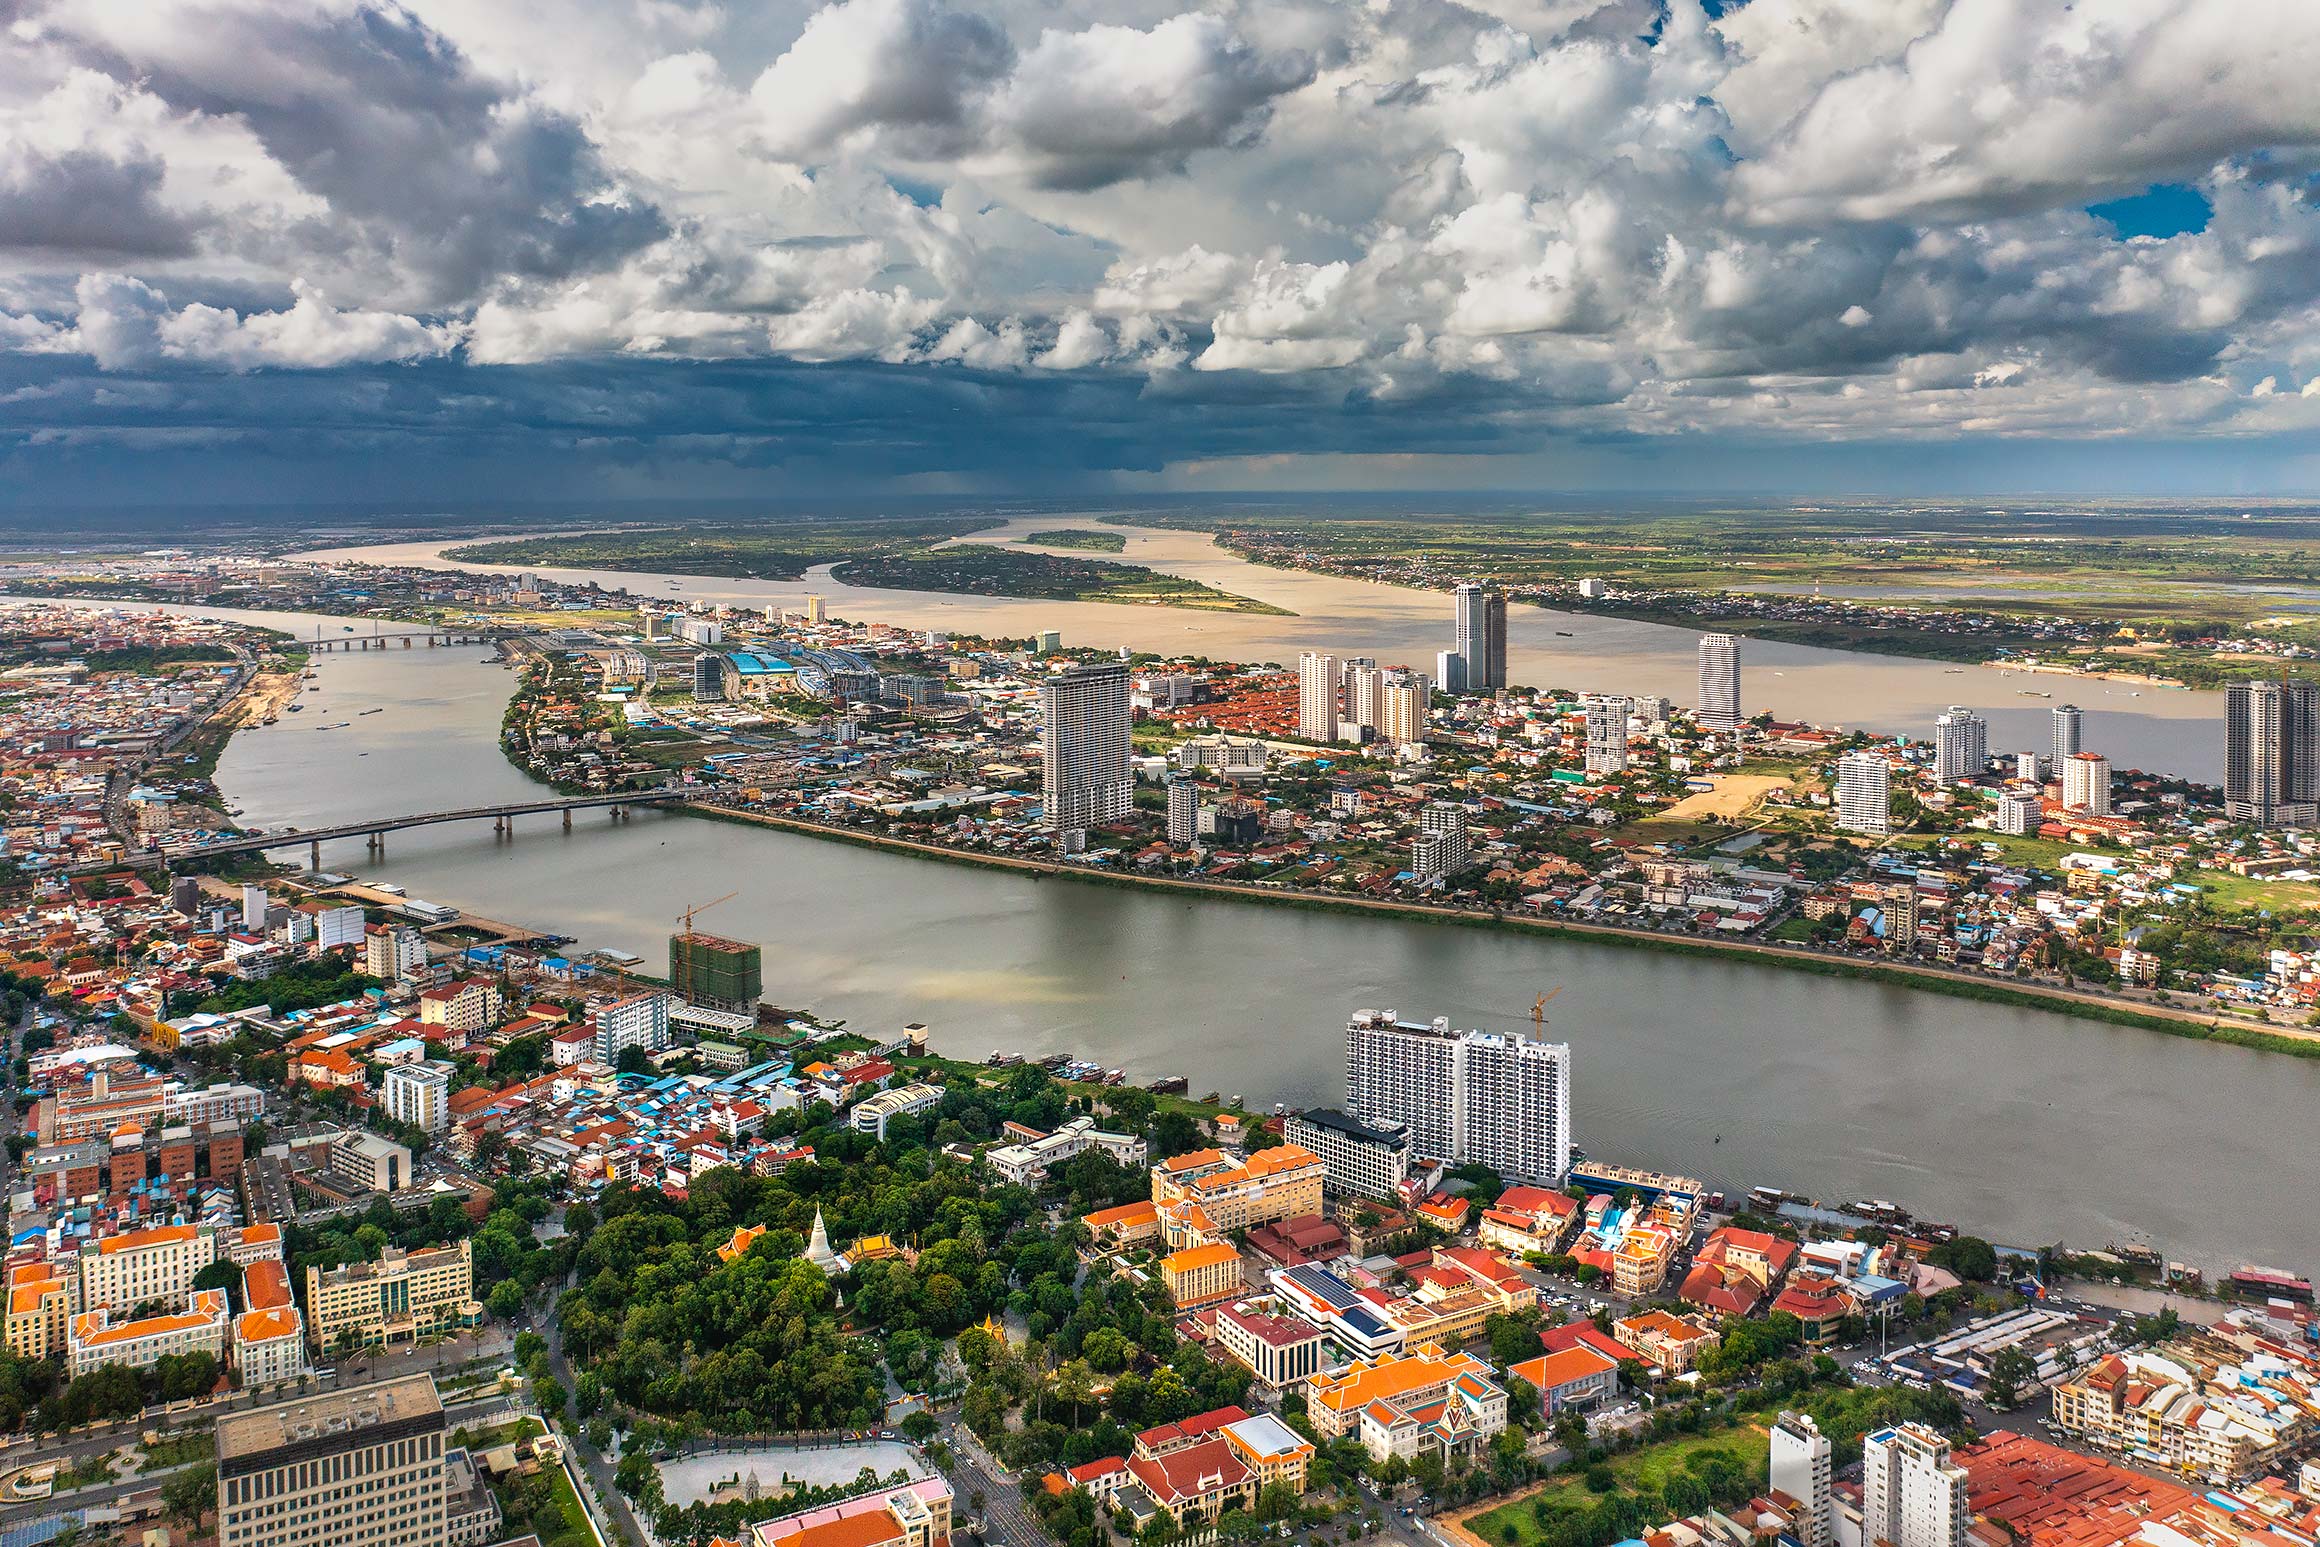 Aerial view of Wat Phnom, Tonle Sap and Mekong rivers in Phnom Penh | Freelance Drone Operator in Cambodia